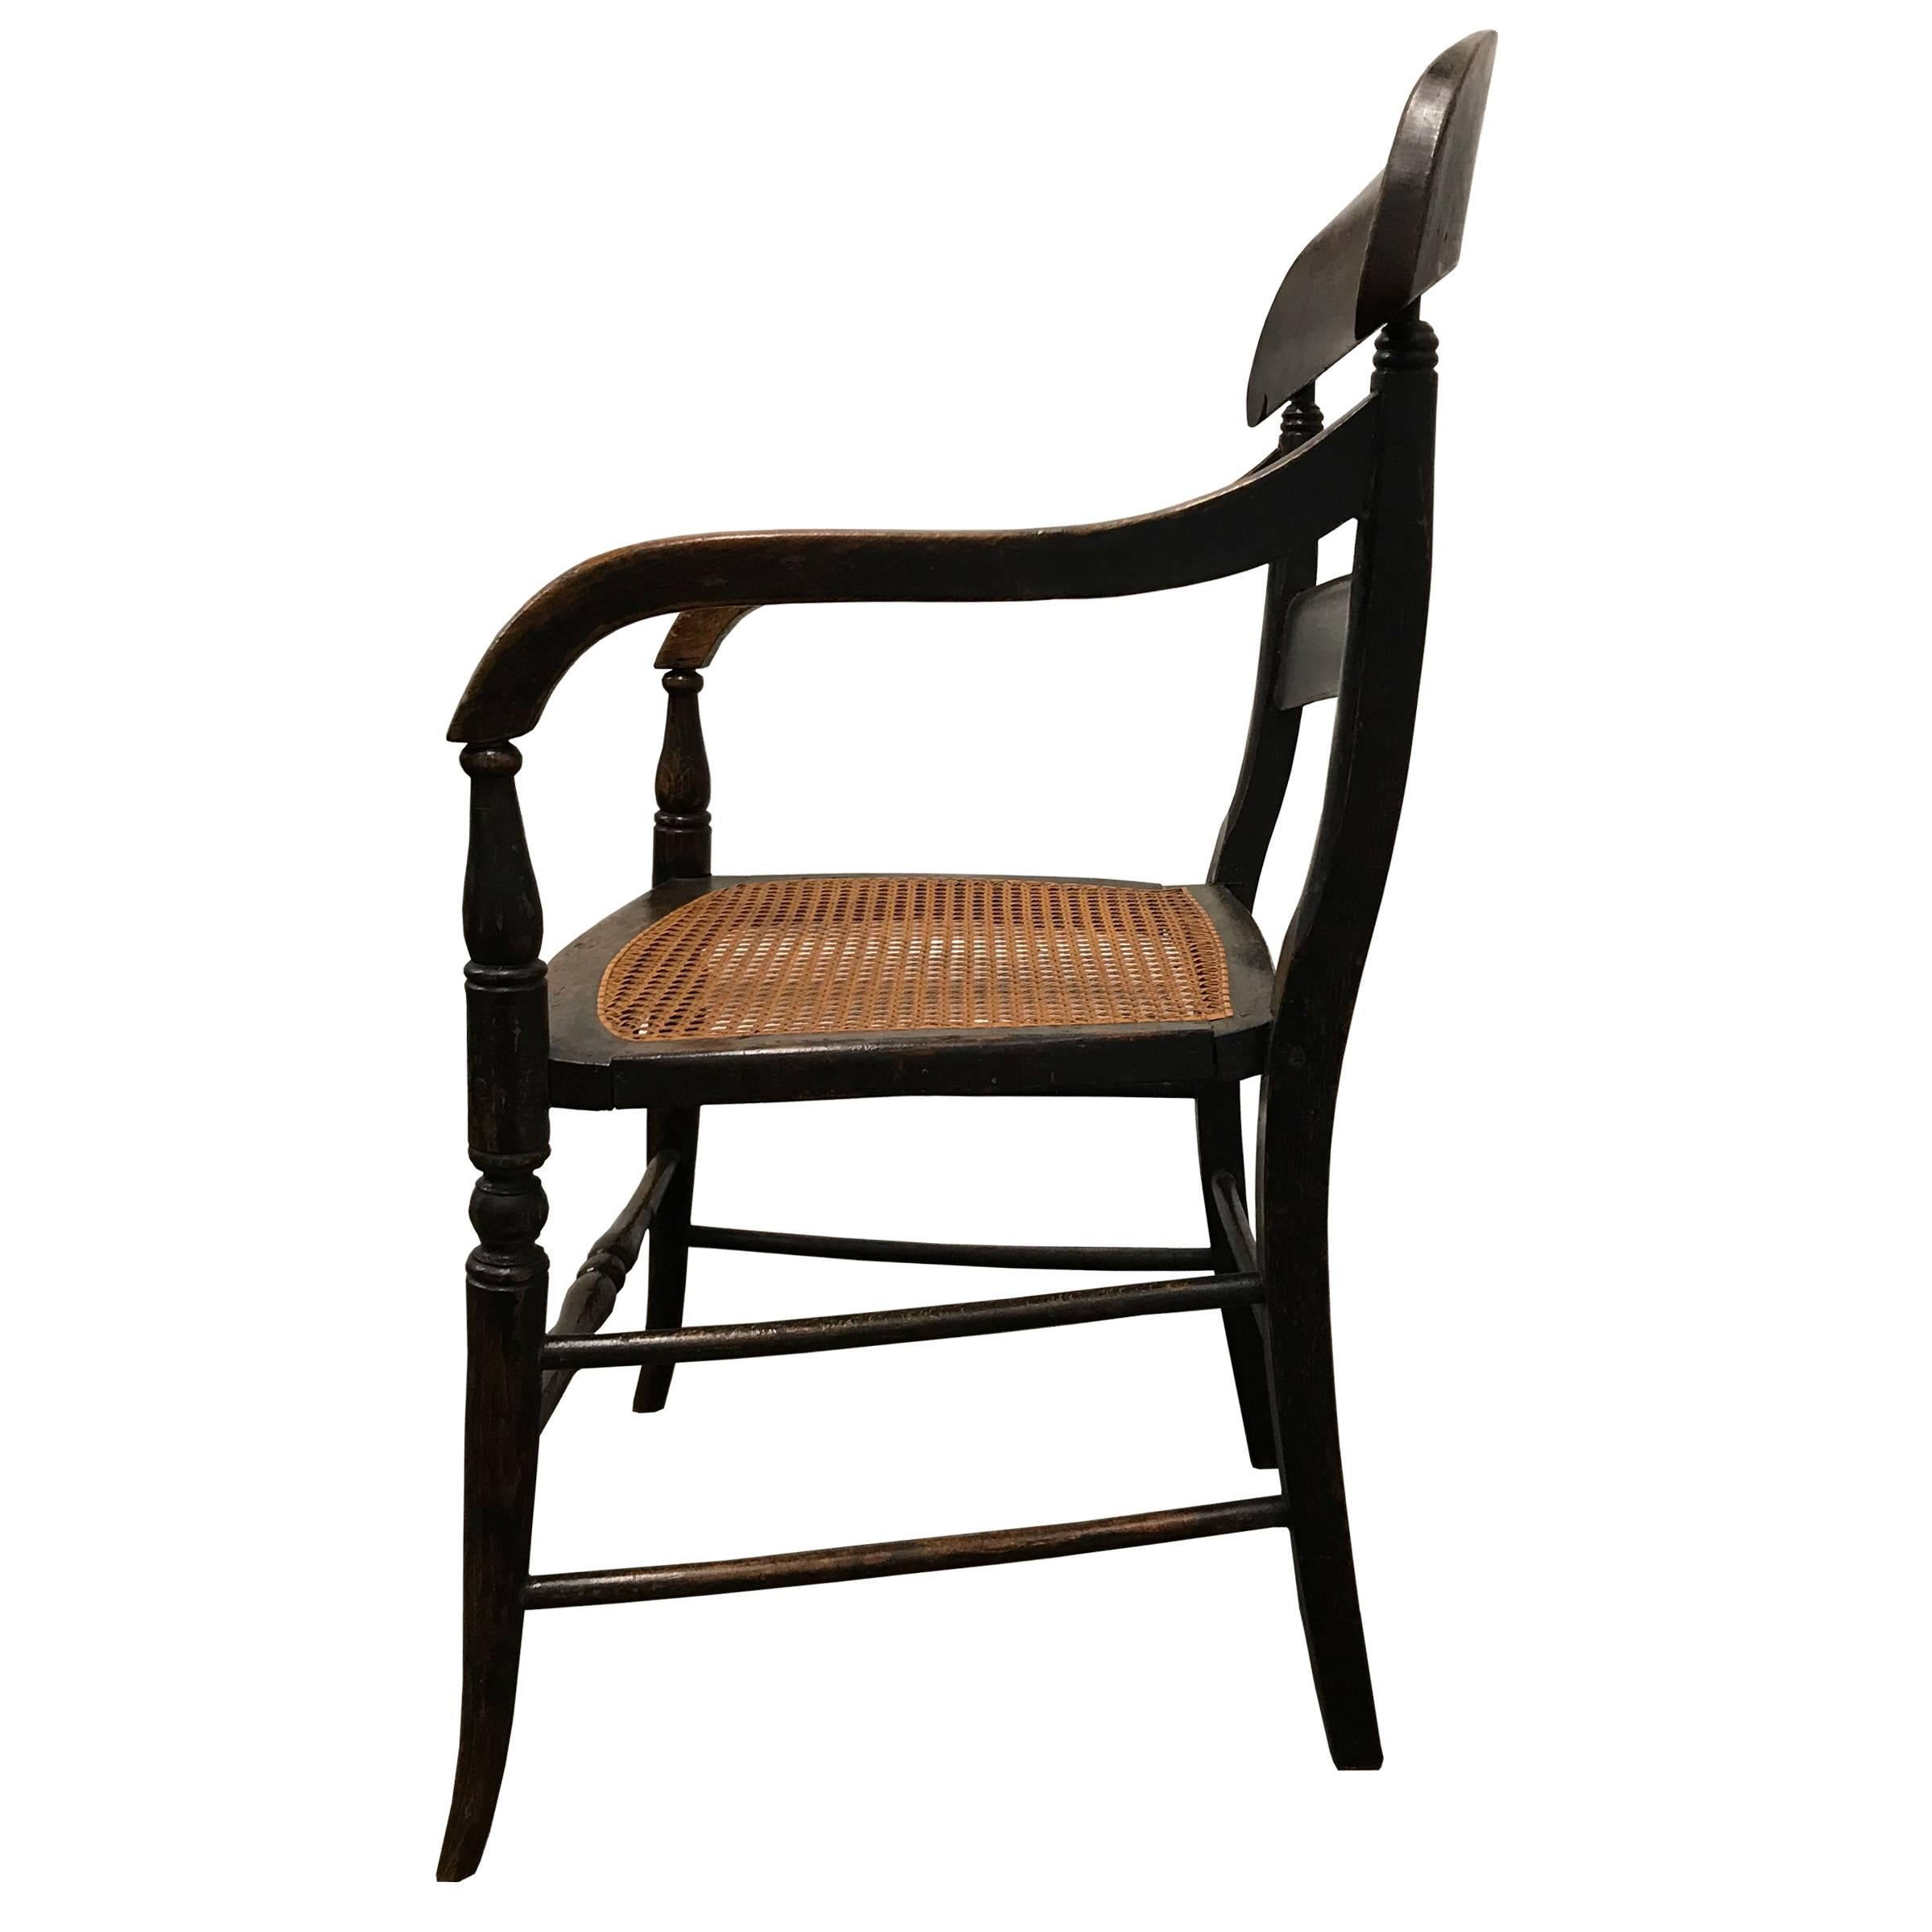 An early 19th century American Empire oak armchair with turned legs, woven cane seat, and a well worn front spindle. The wood grain is faux painted, a very popular decorative painting technique in the early 19th century in America.